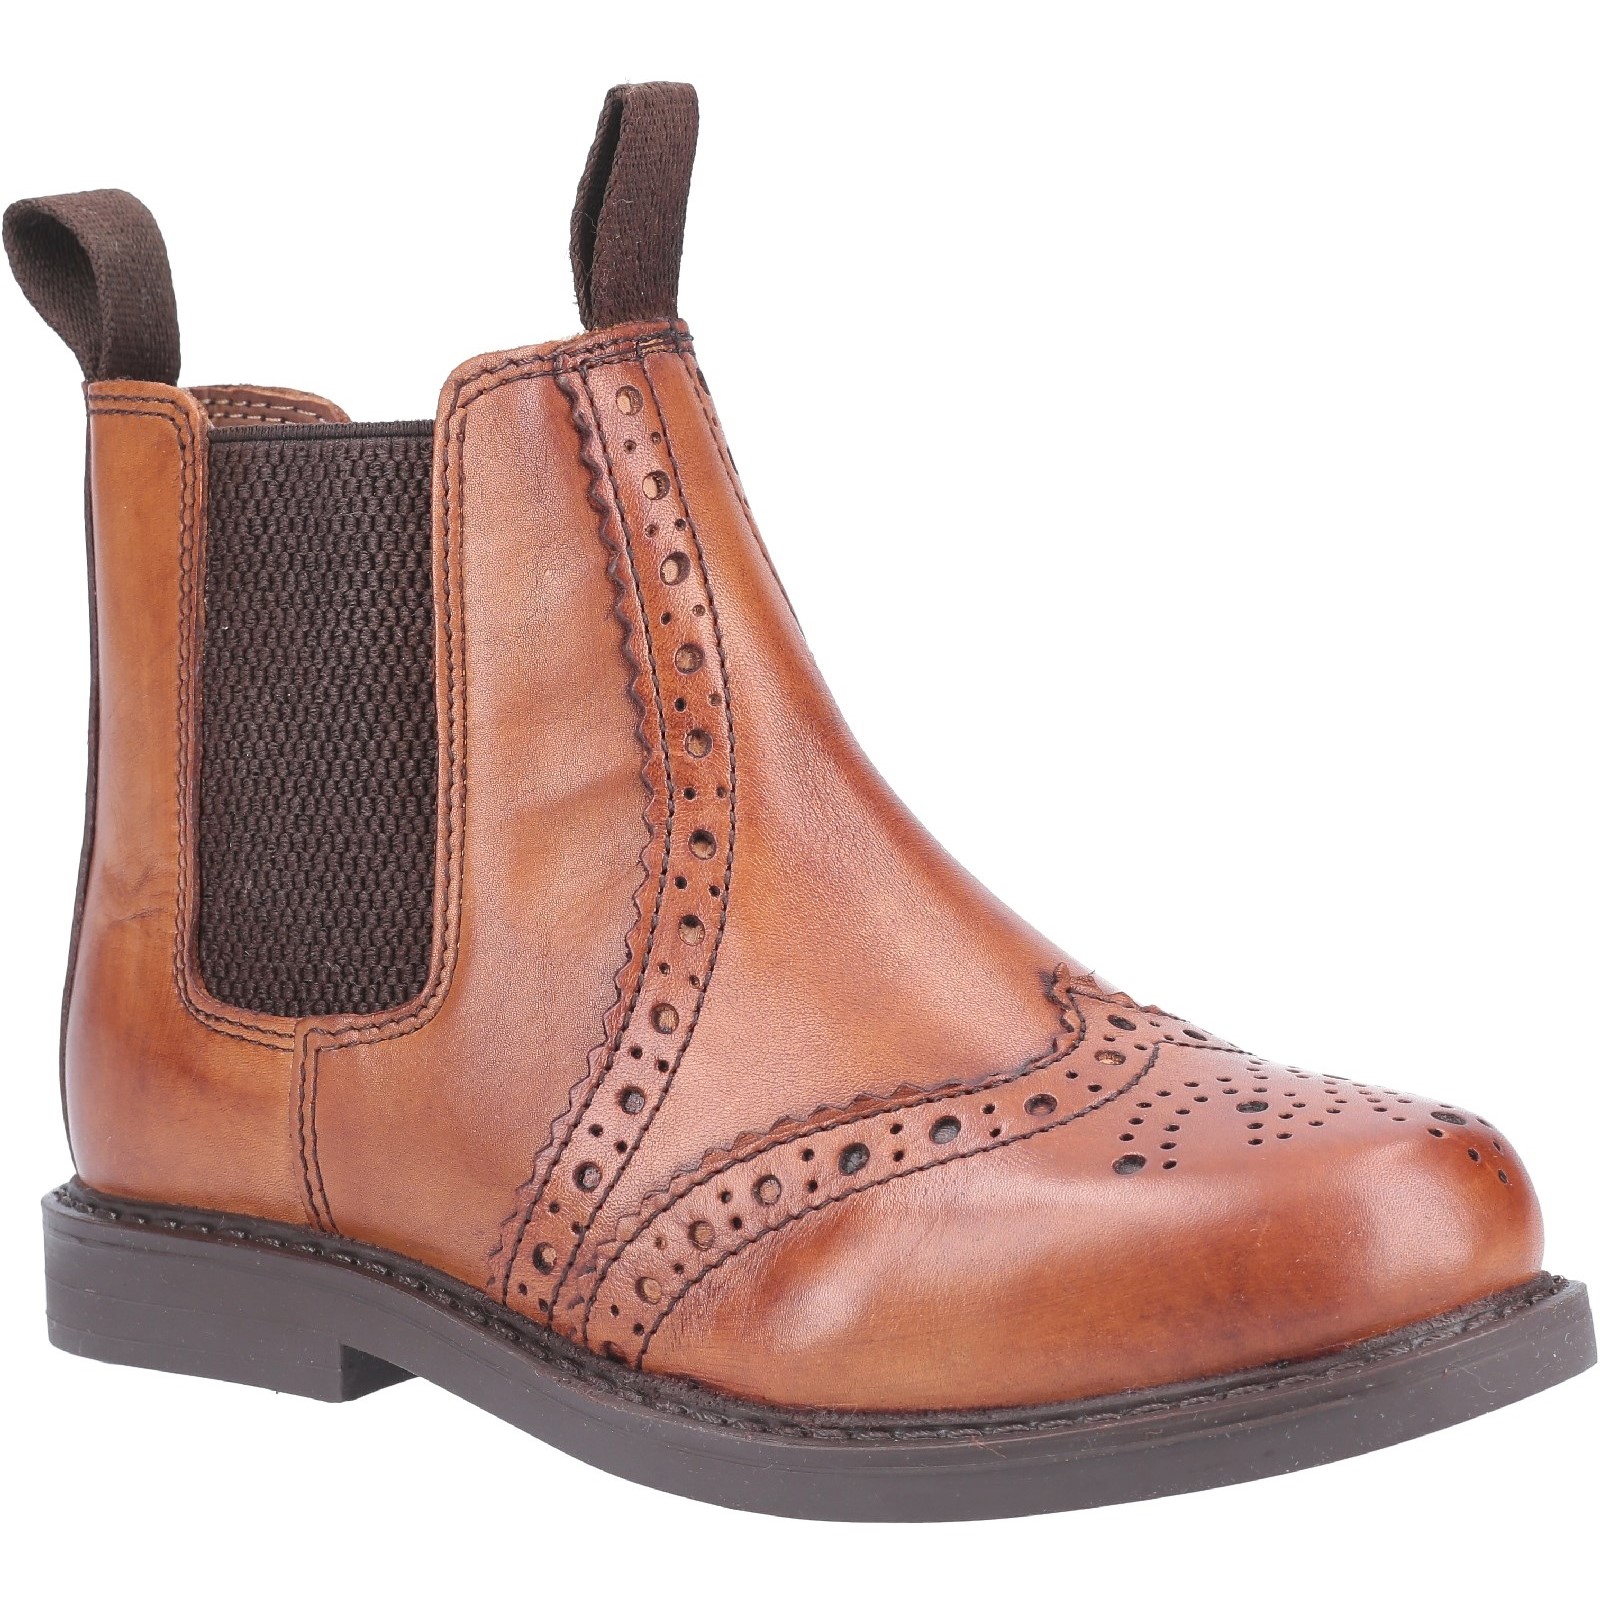 Nympsfield Brogue Pull On Chelsea Boots